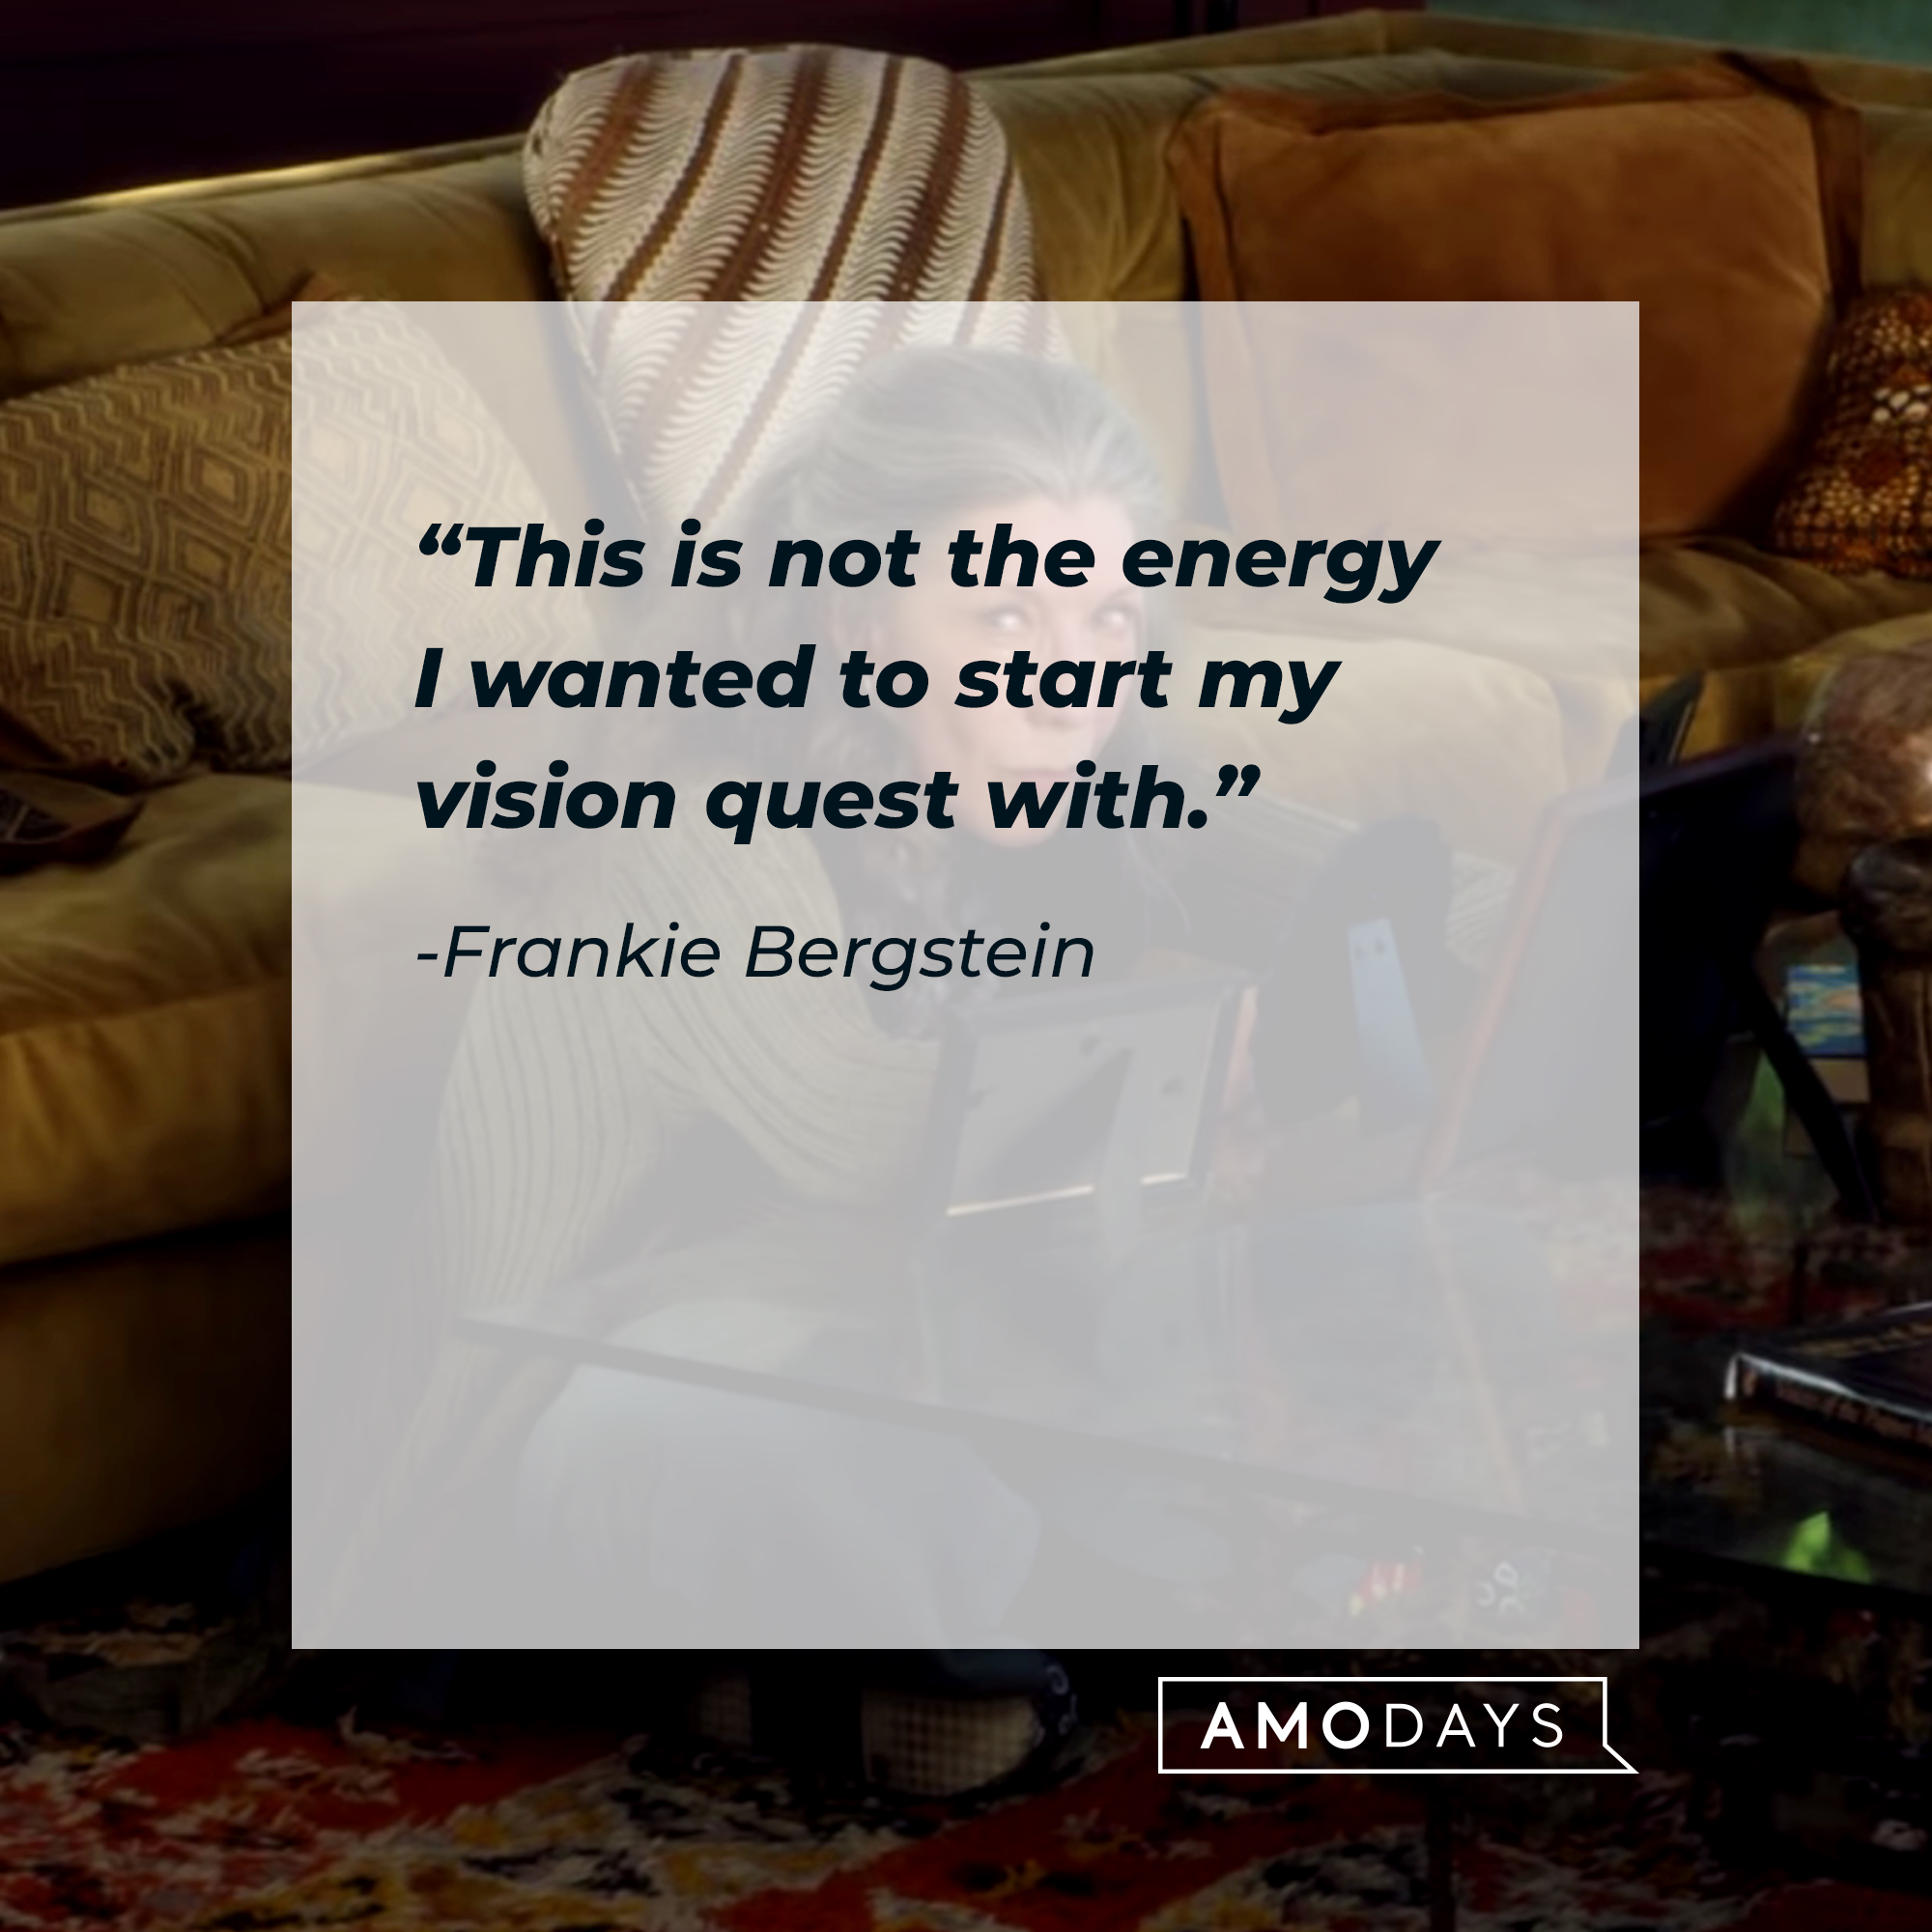 Frankie Bergstein's quote: “This is not the energy I wanted to start my vision quest with.” | Source: youtube.com/Netflix